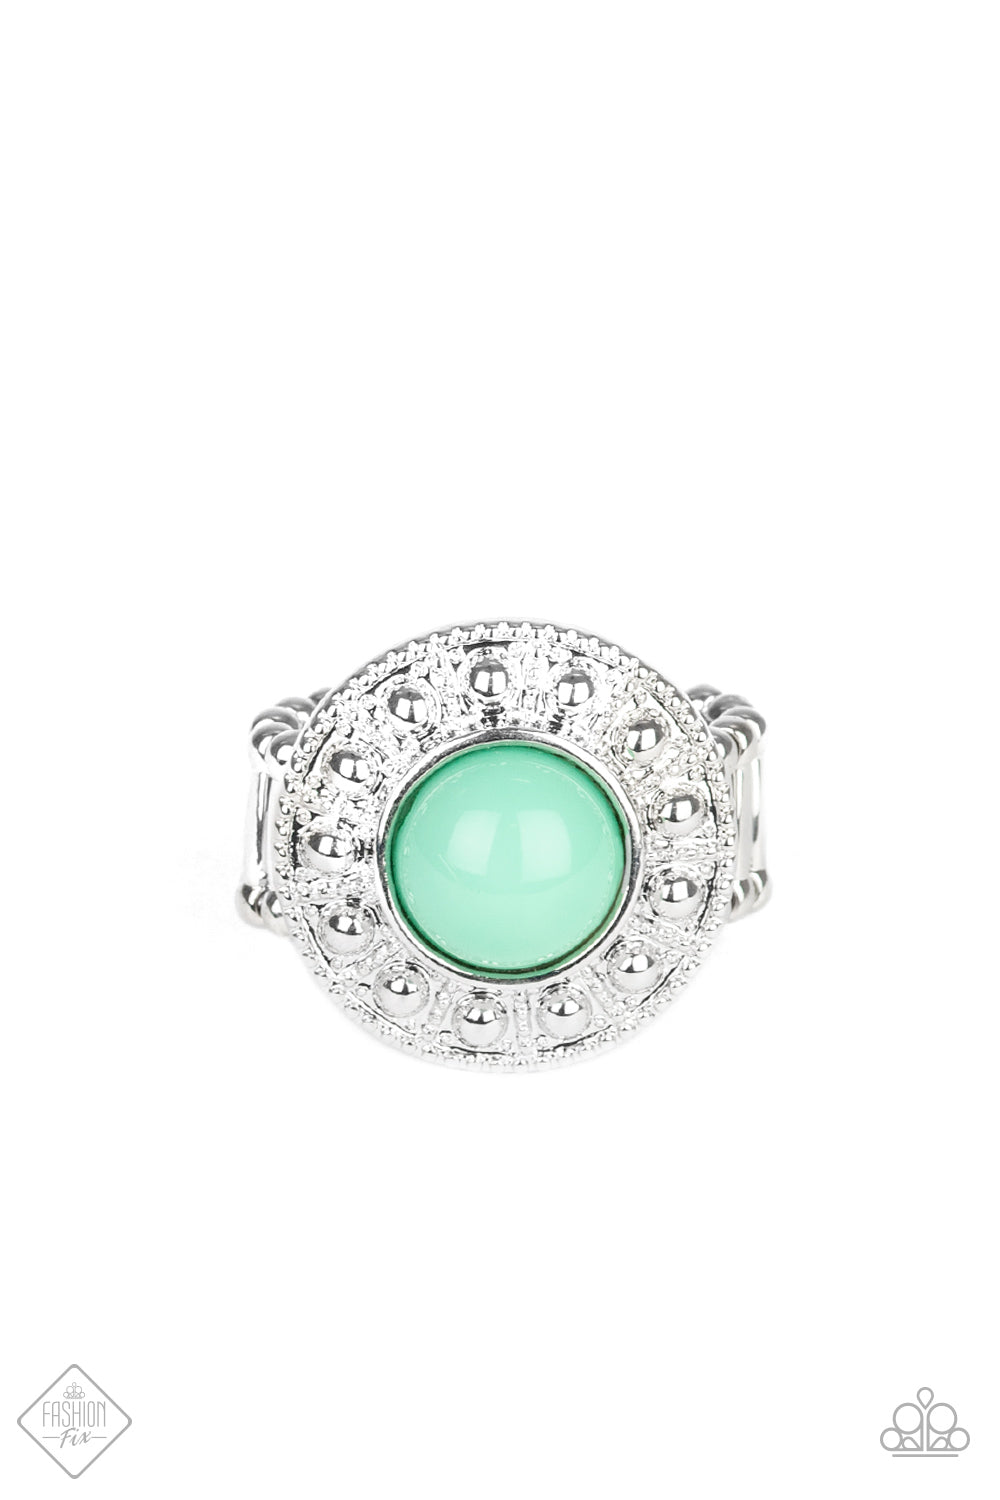 Treasure Chest Shimmer - green - Paparazzi ring